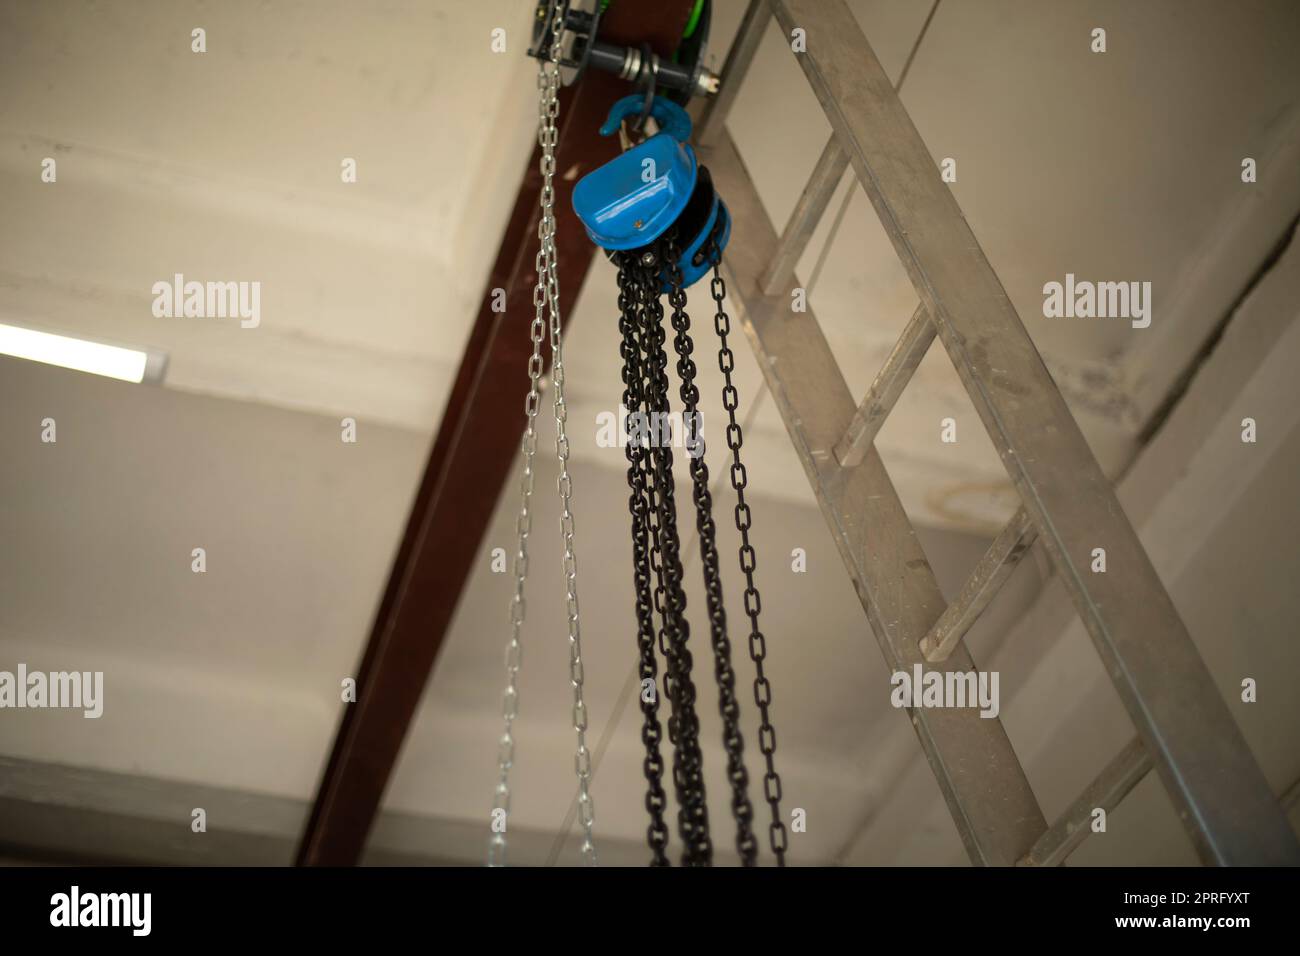 Chain on ceiling. Chains hang on steel beam. Stock Photo